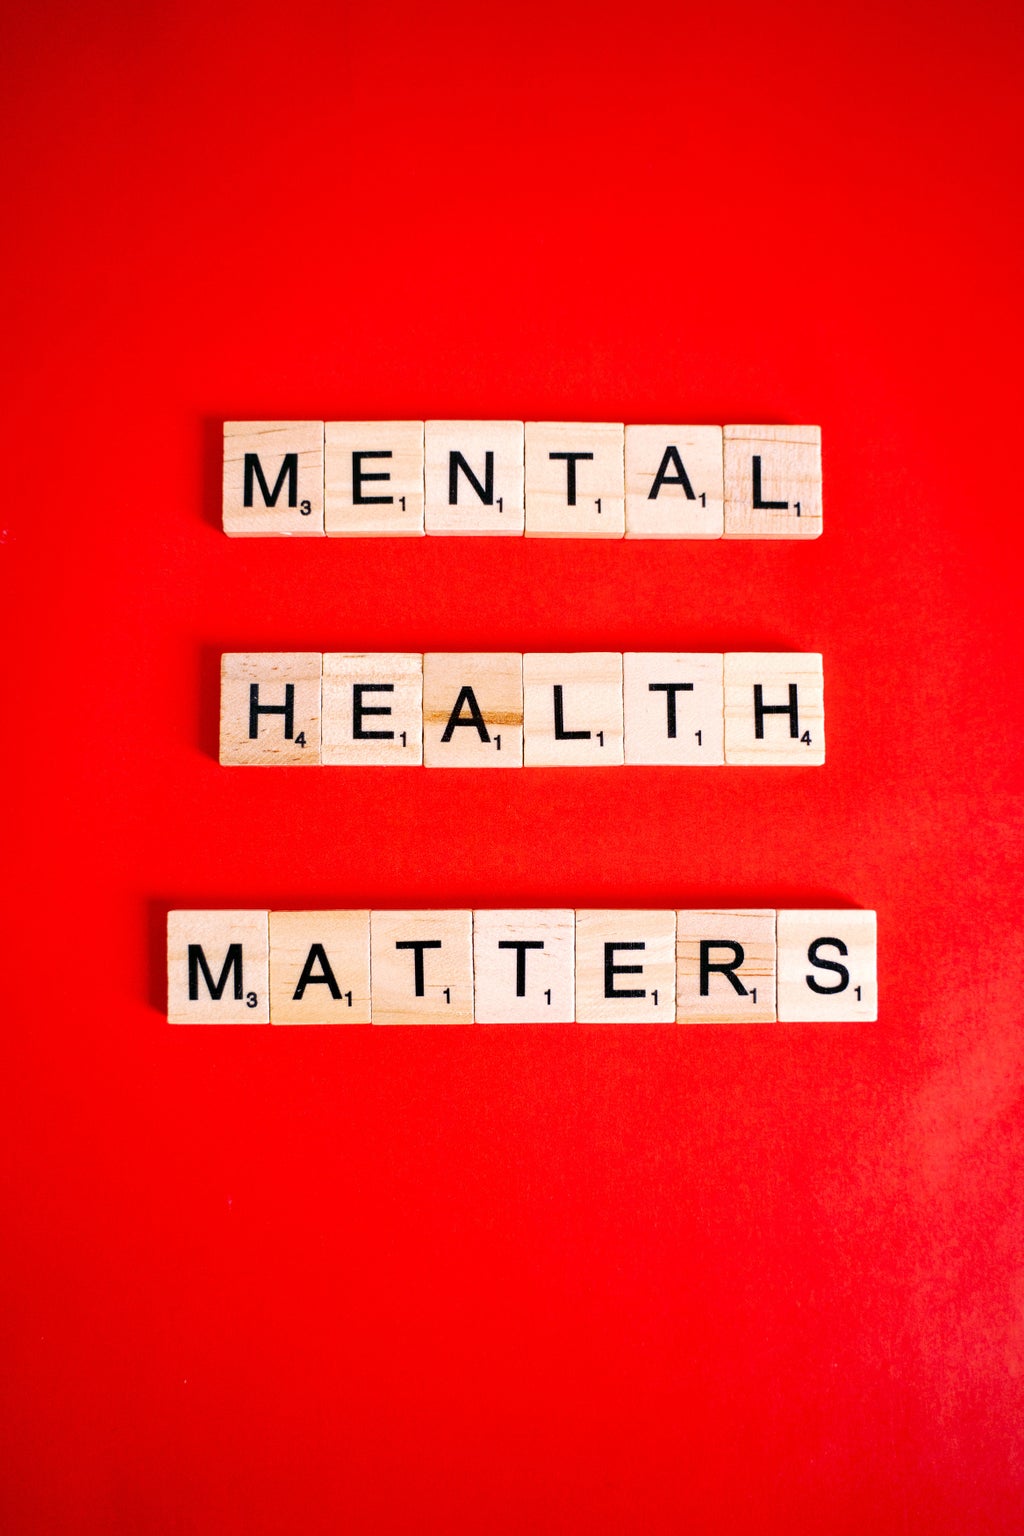 block letters spelling out "mental health matters" on a red background